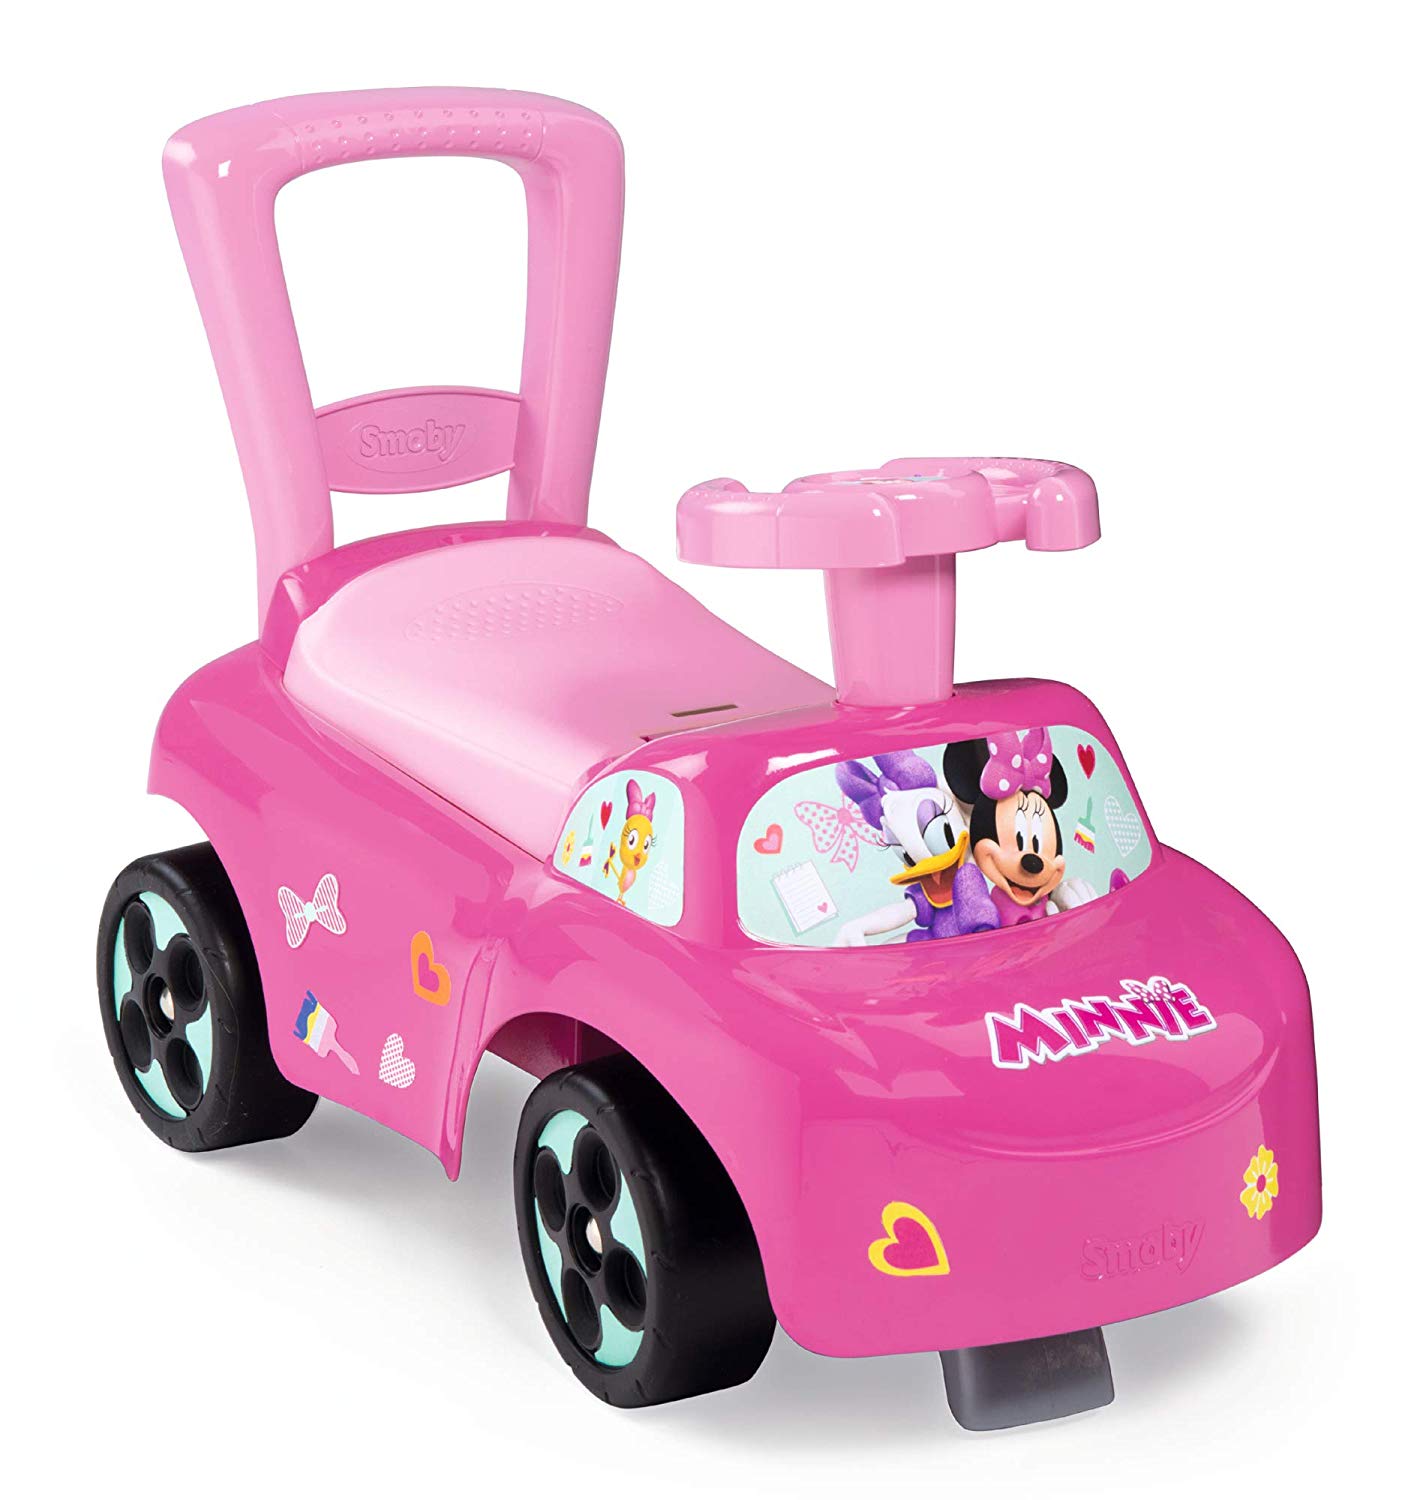 Smoby 720522 Minnie Car Ride-On Toy Pink